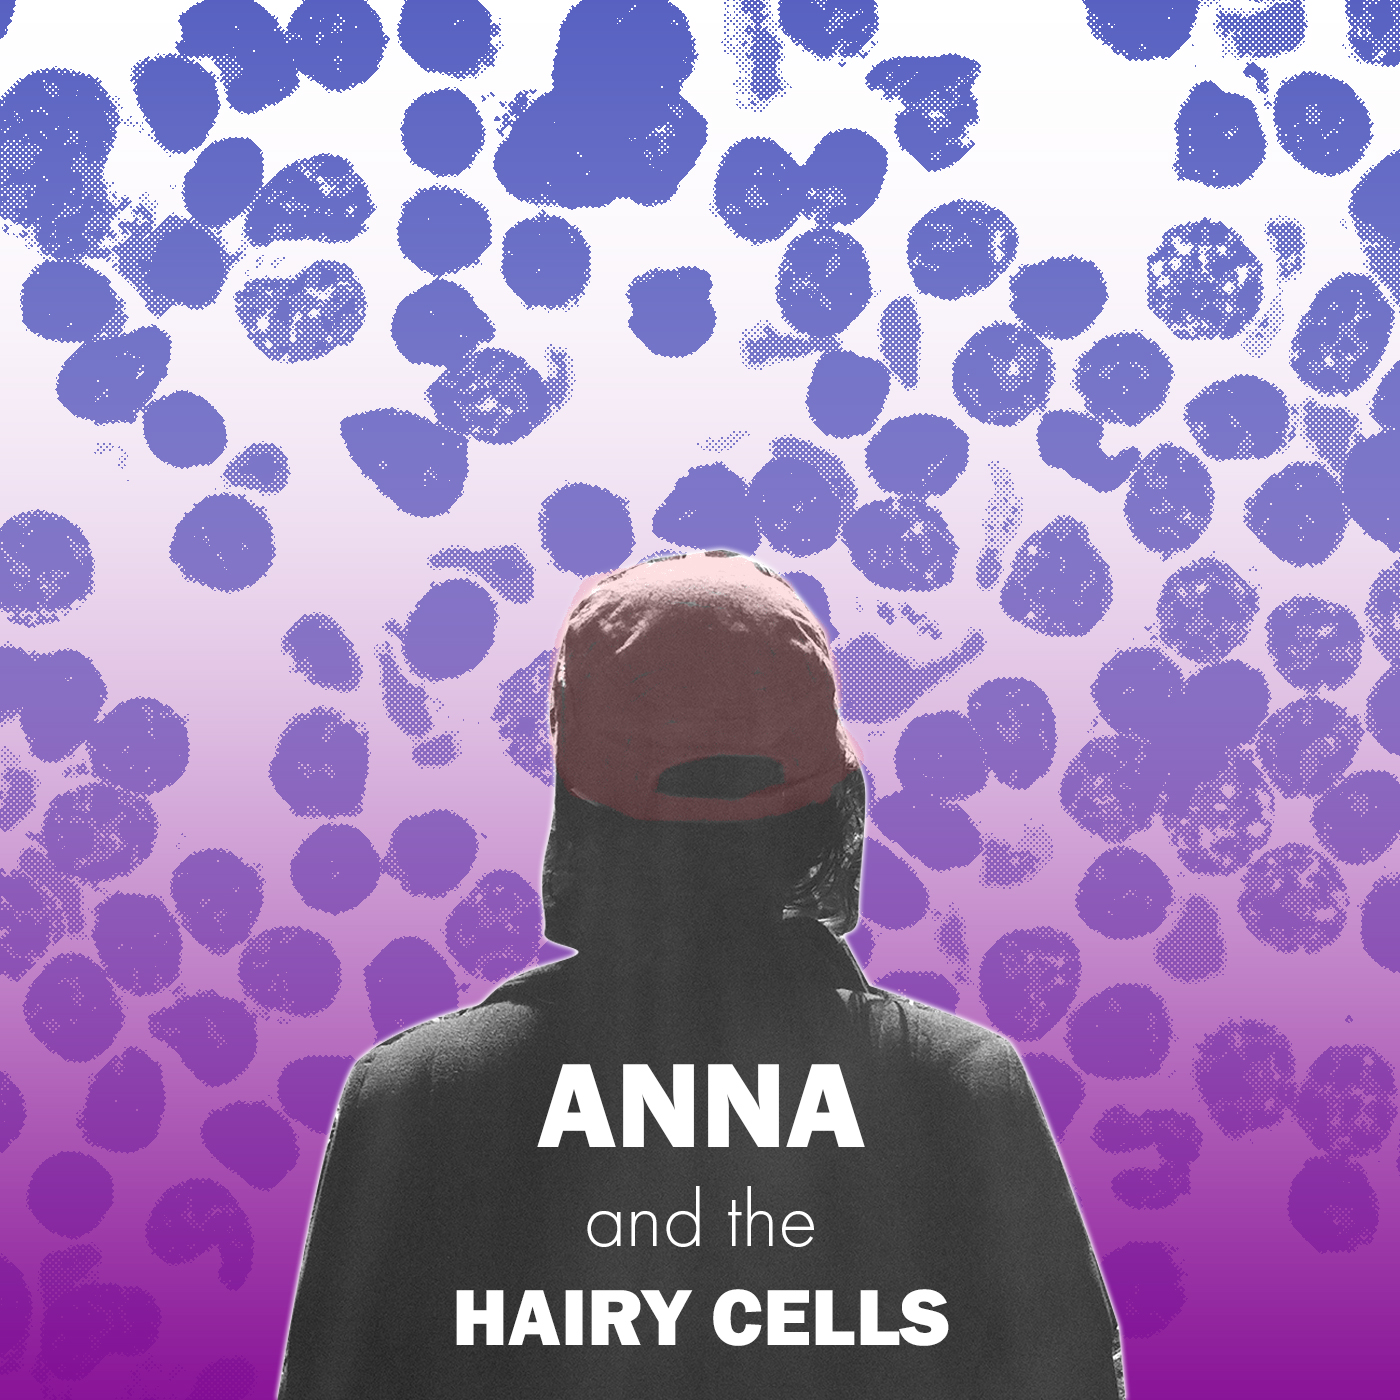 Episodes - Anna and the Hairy Cells